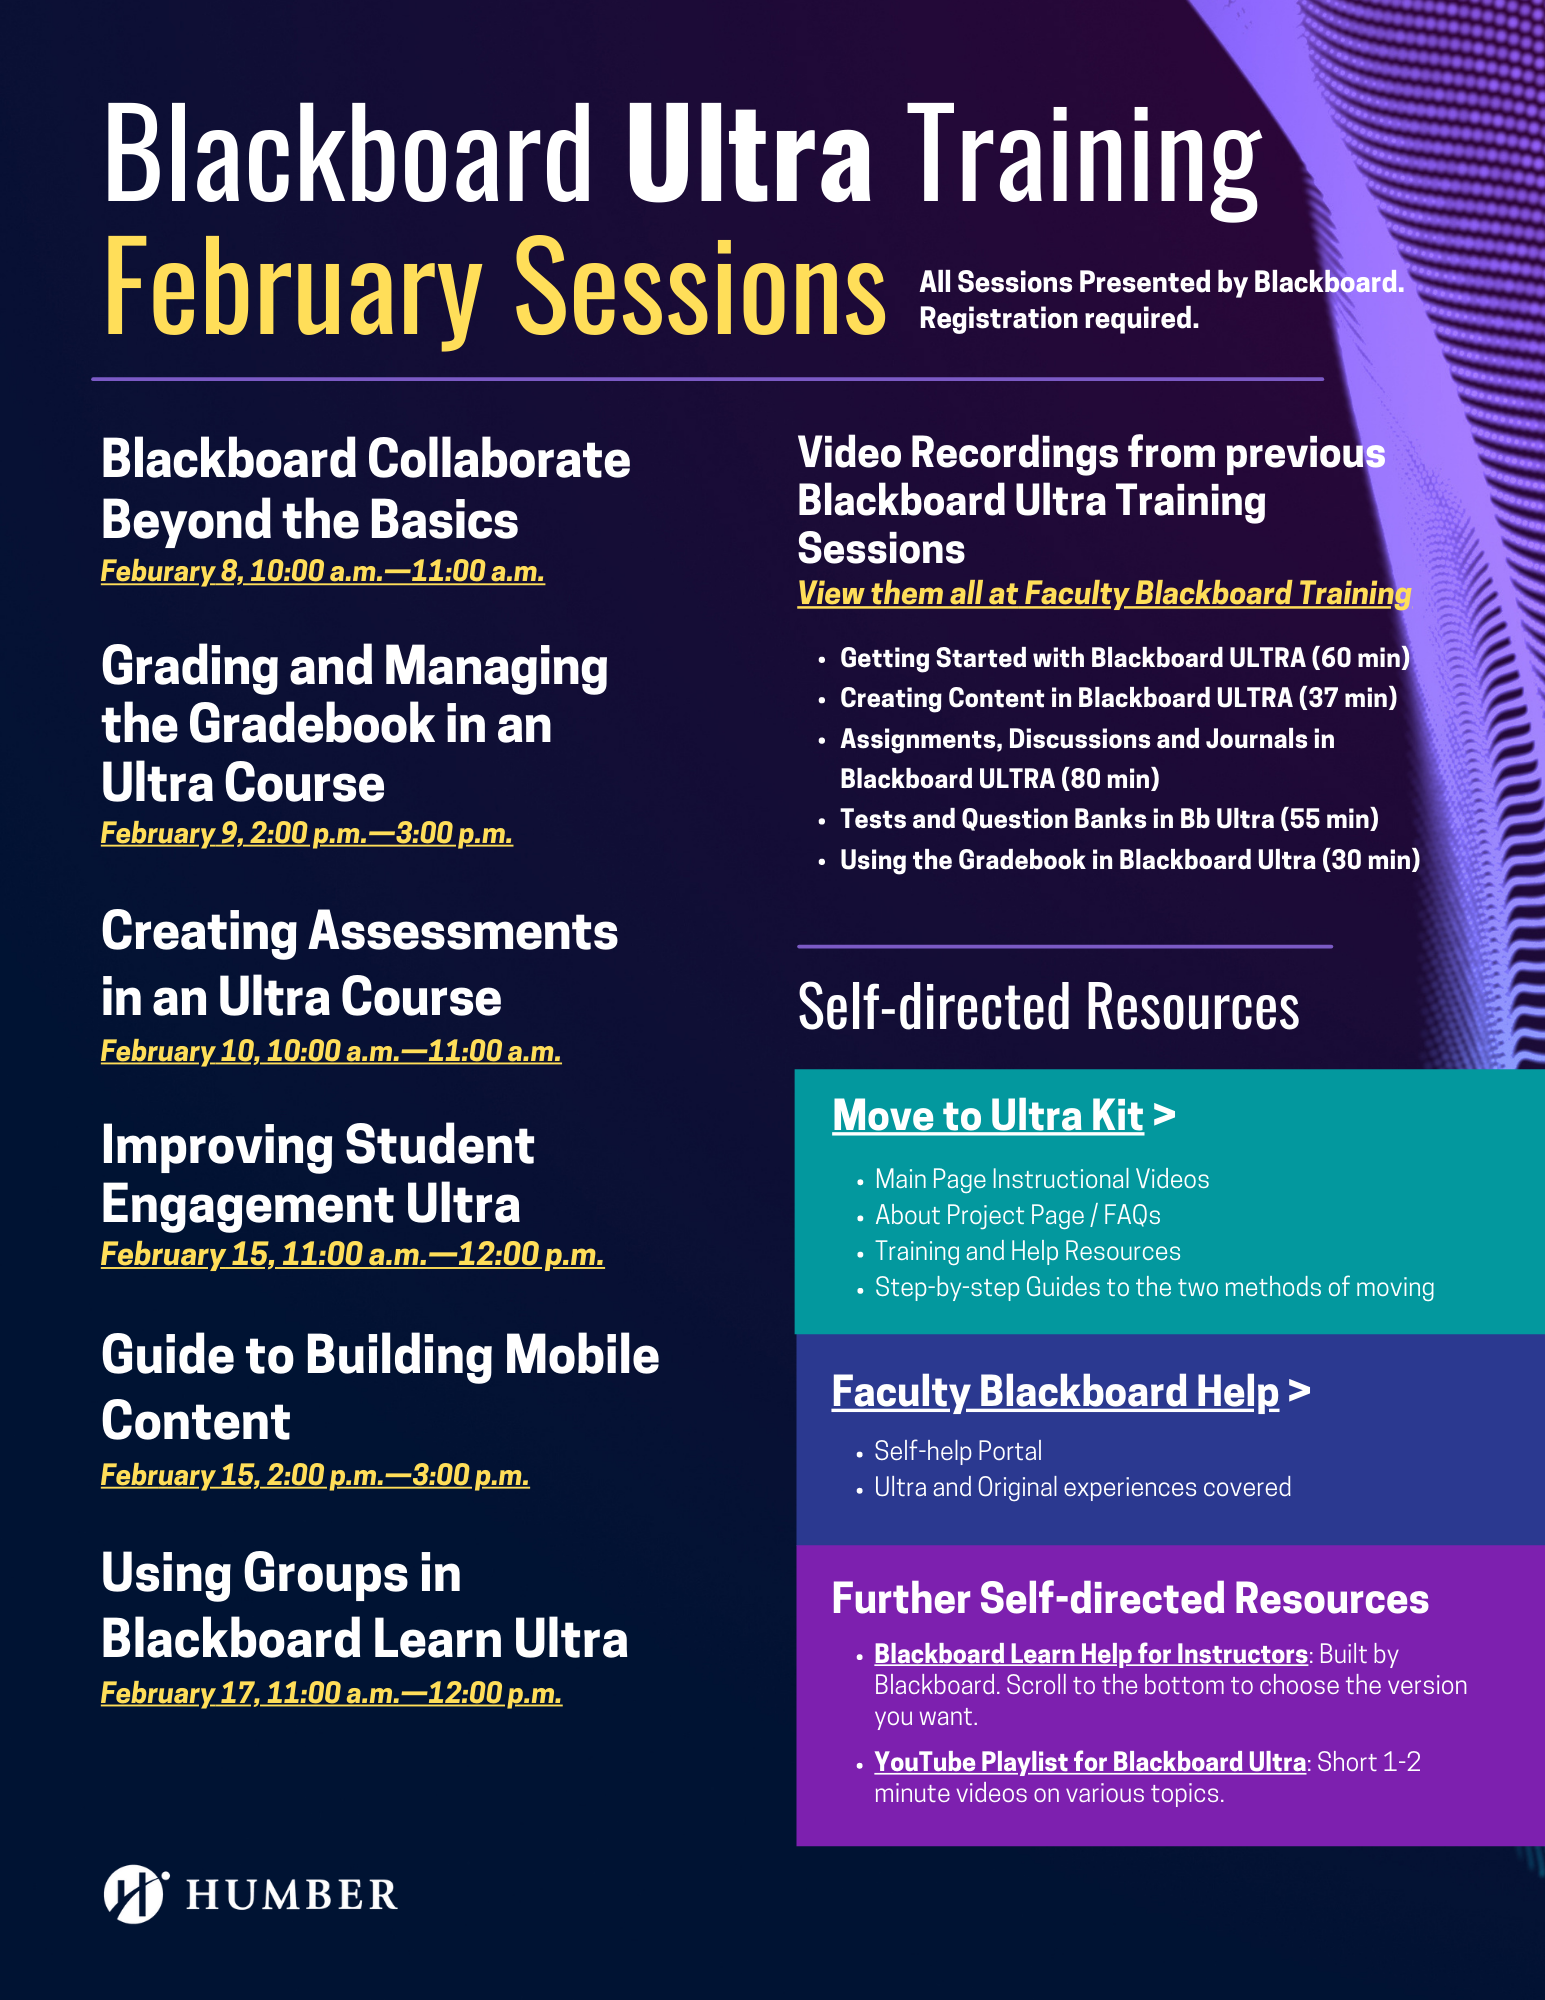 Blackboard Ultra Training Sessions posted for February